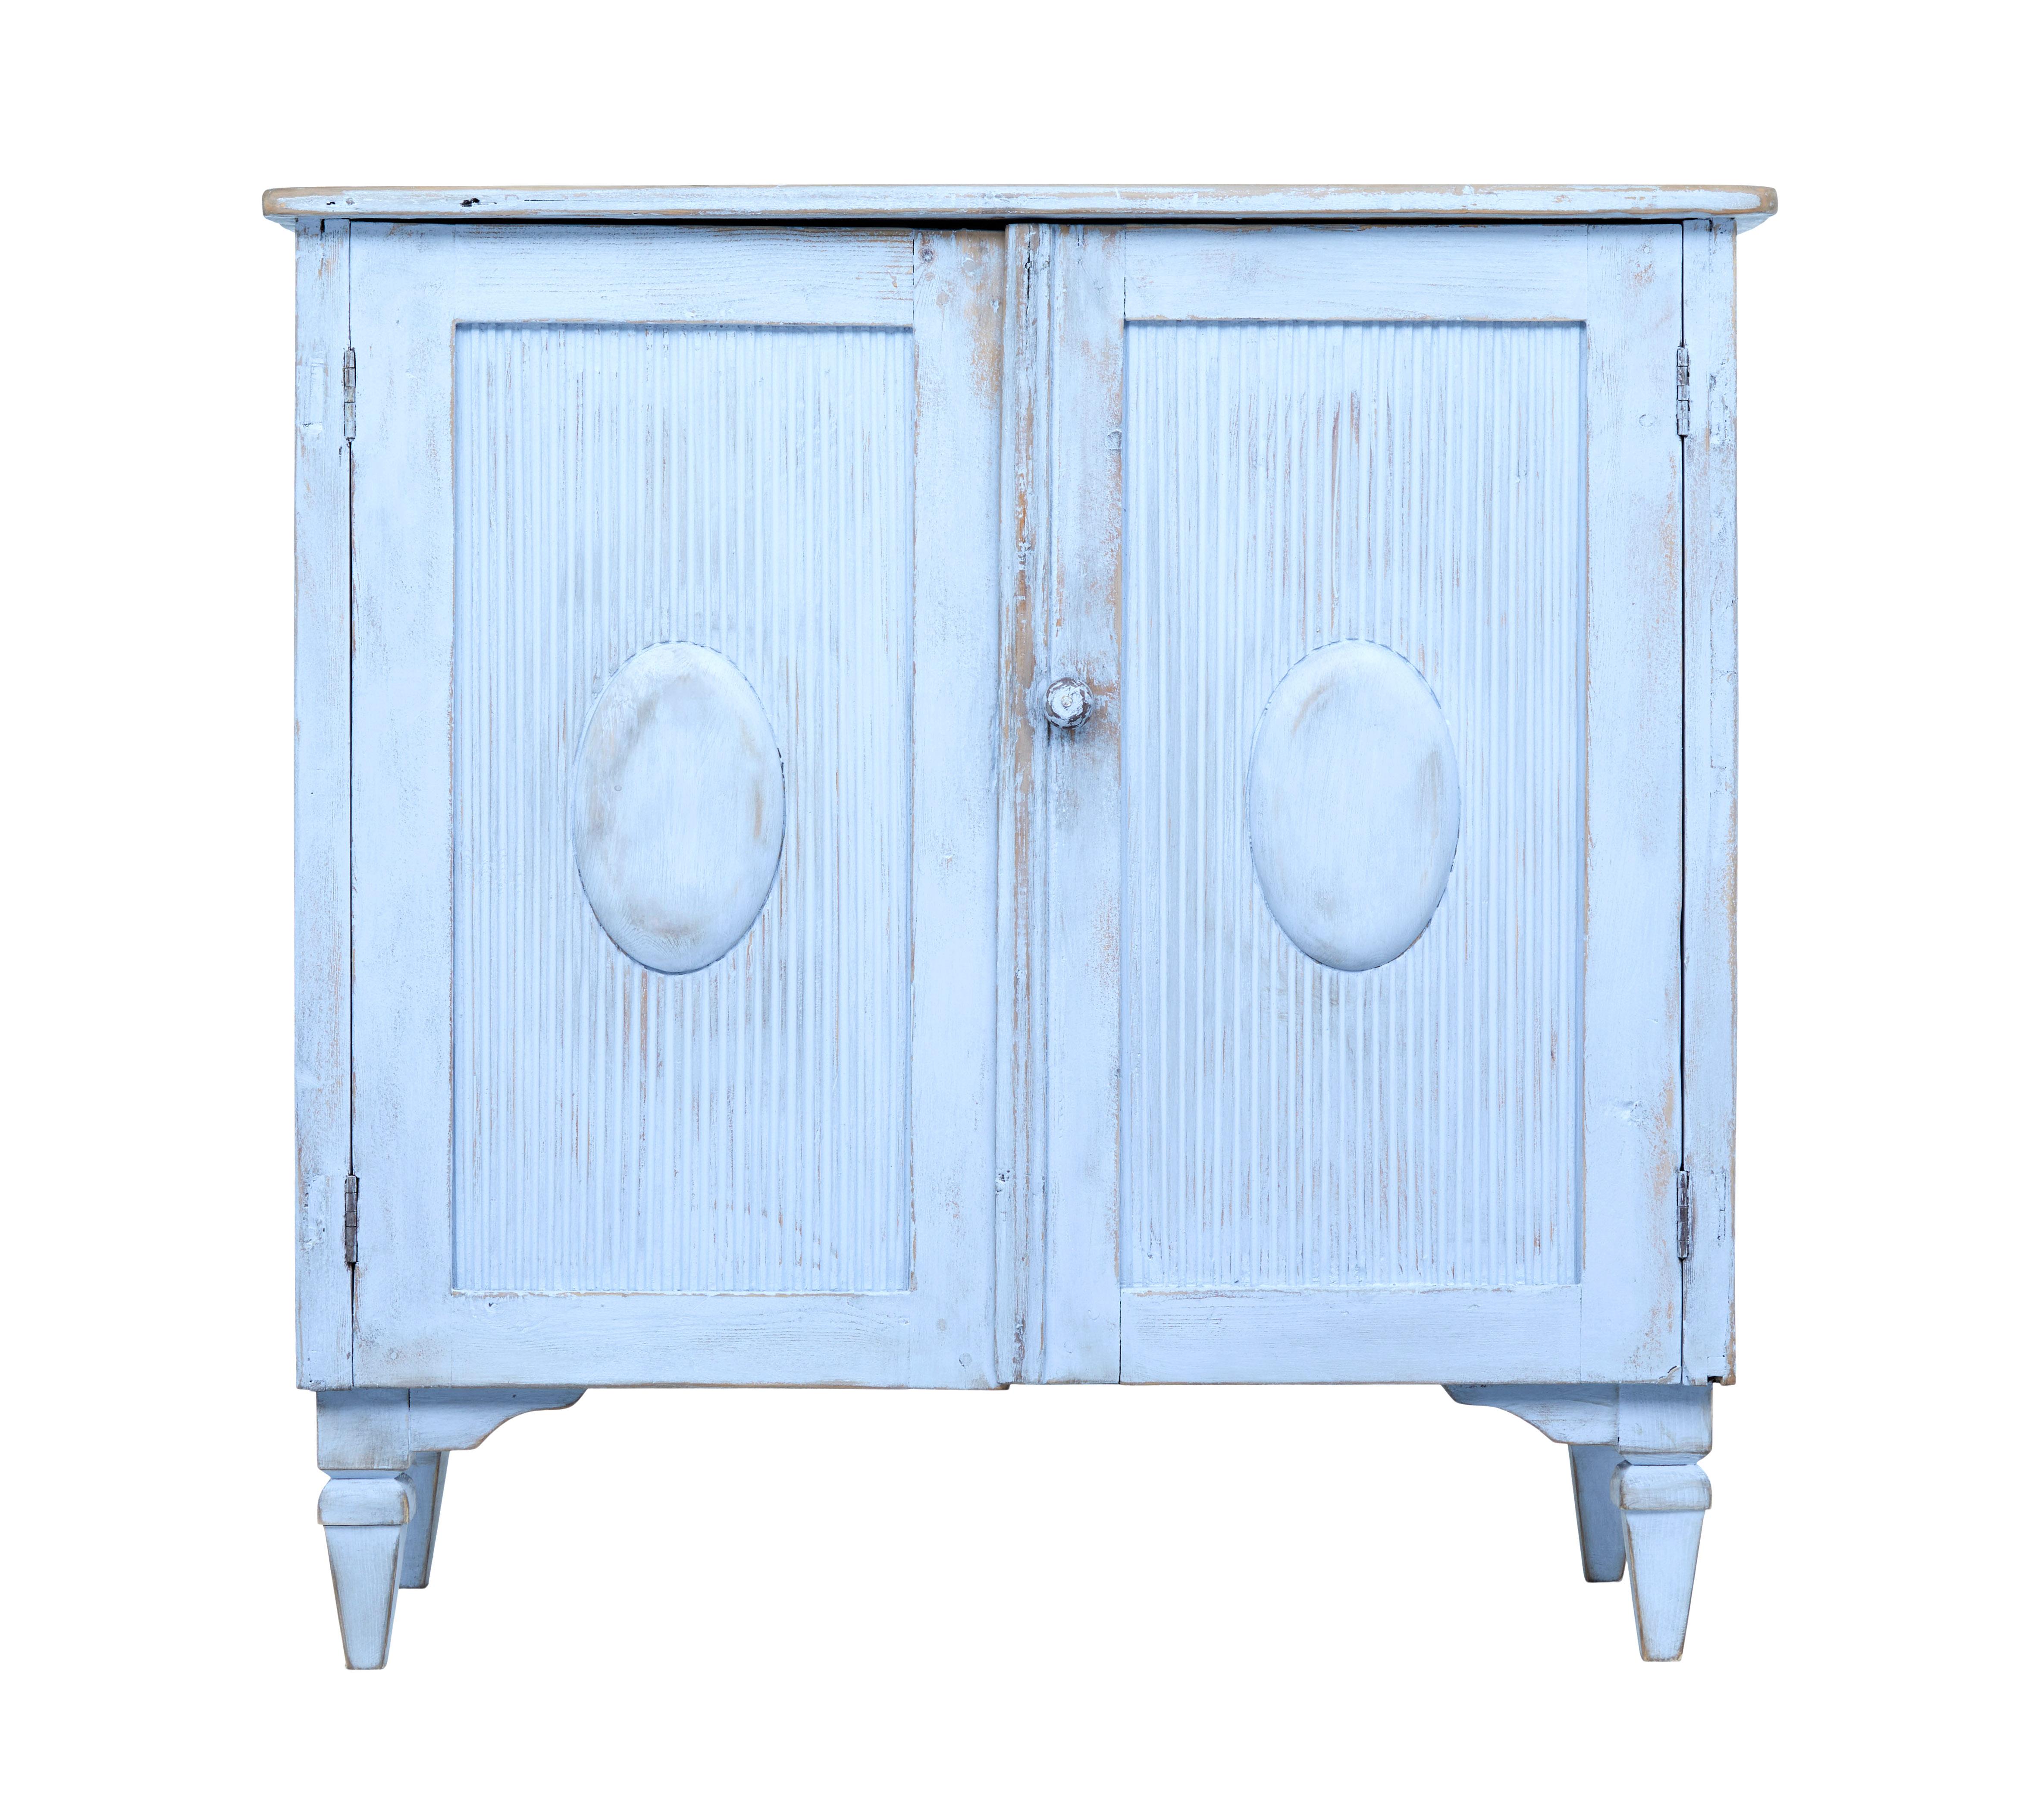 19th century Scandinavian painted cupboard circa 1870.

Blue painted cupboard with multiple uses around the home. Offered with the original patina on the inside, but this could be sanded back or sealed if desired.

Double door front, each door